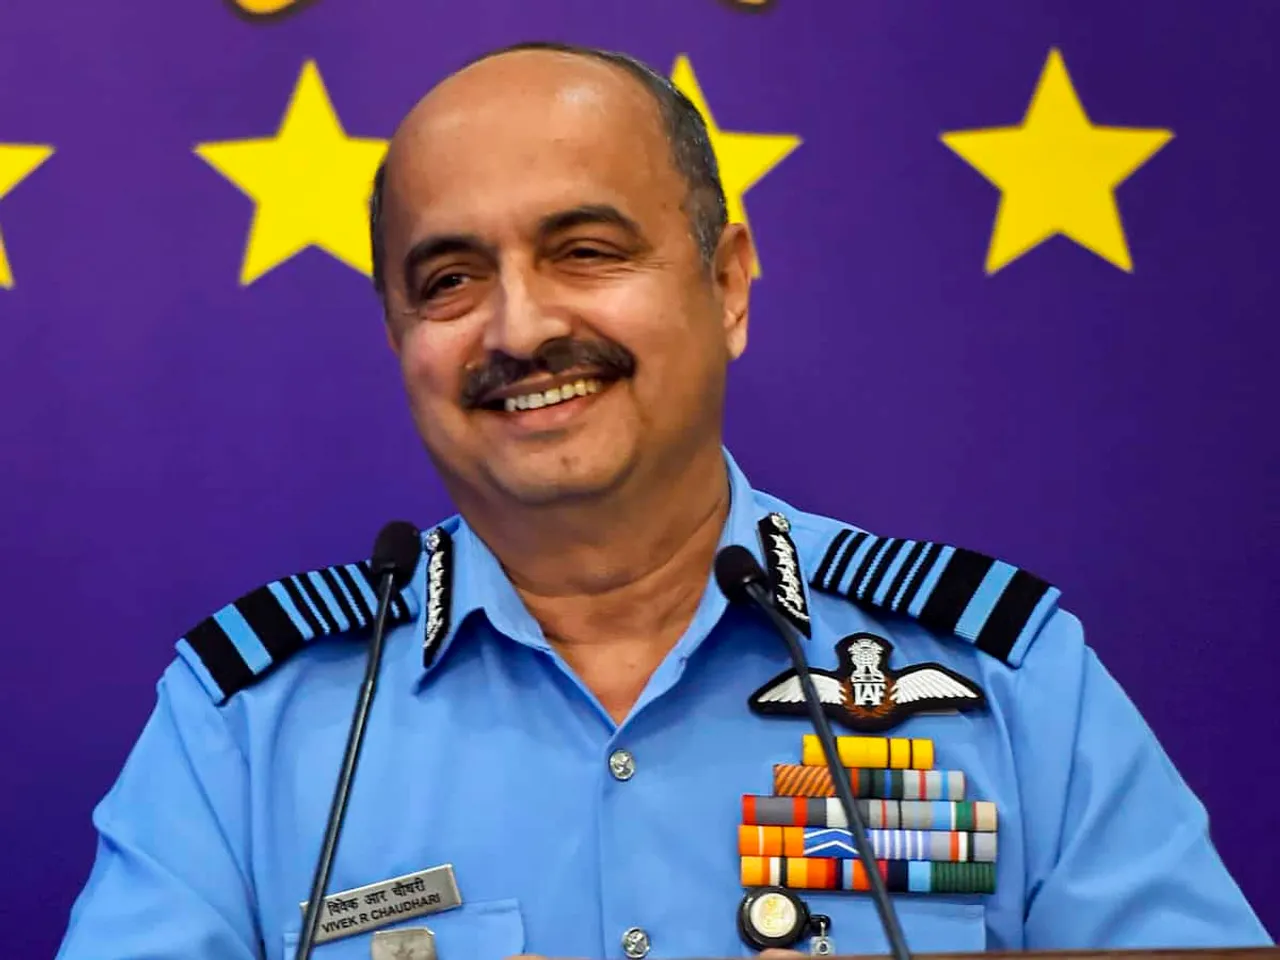 Armed Forces a great career choice for those seeking adventure: IAF Chief V R Chaudhari